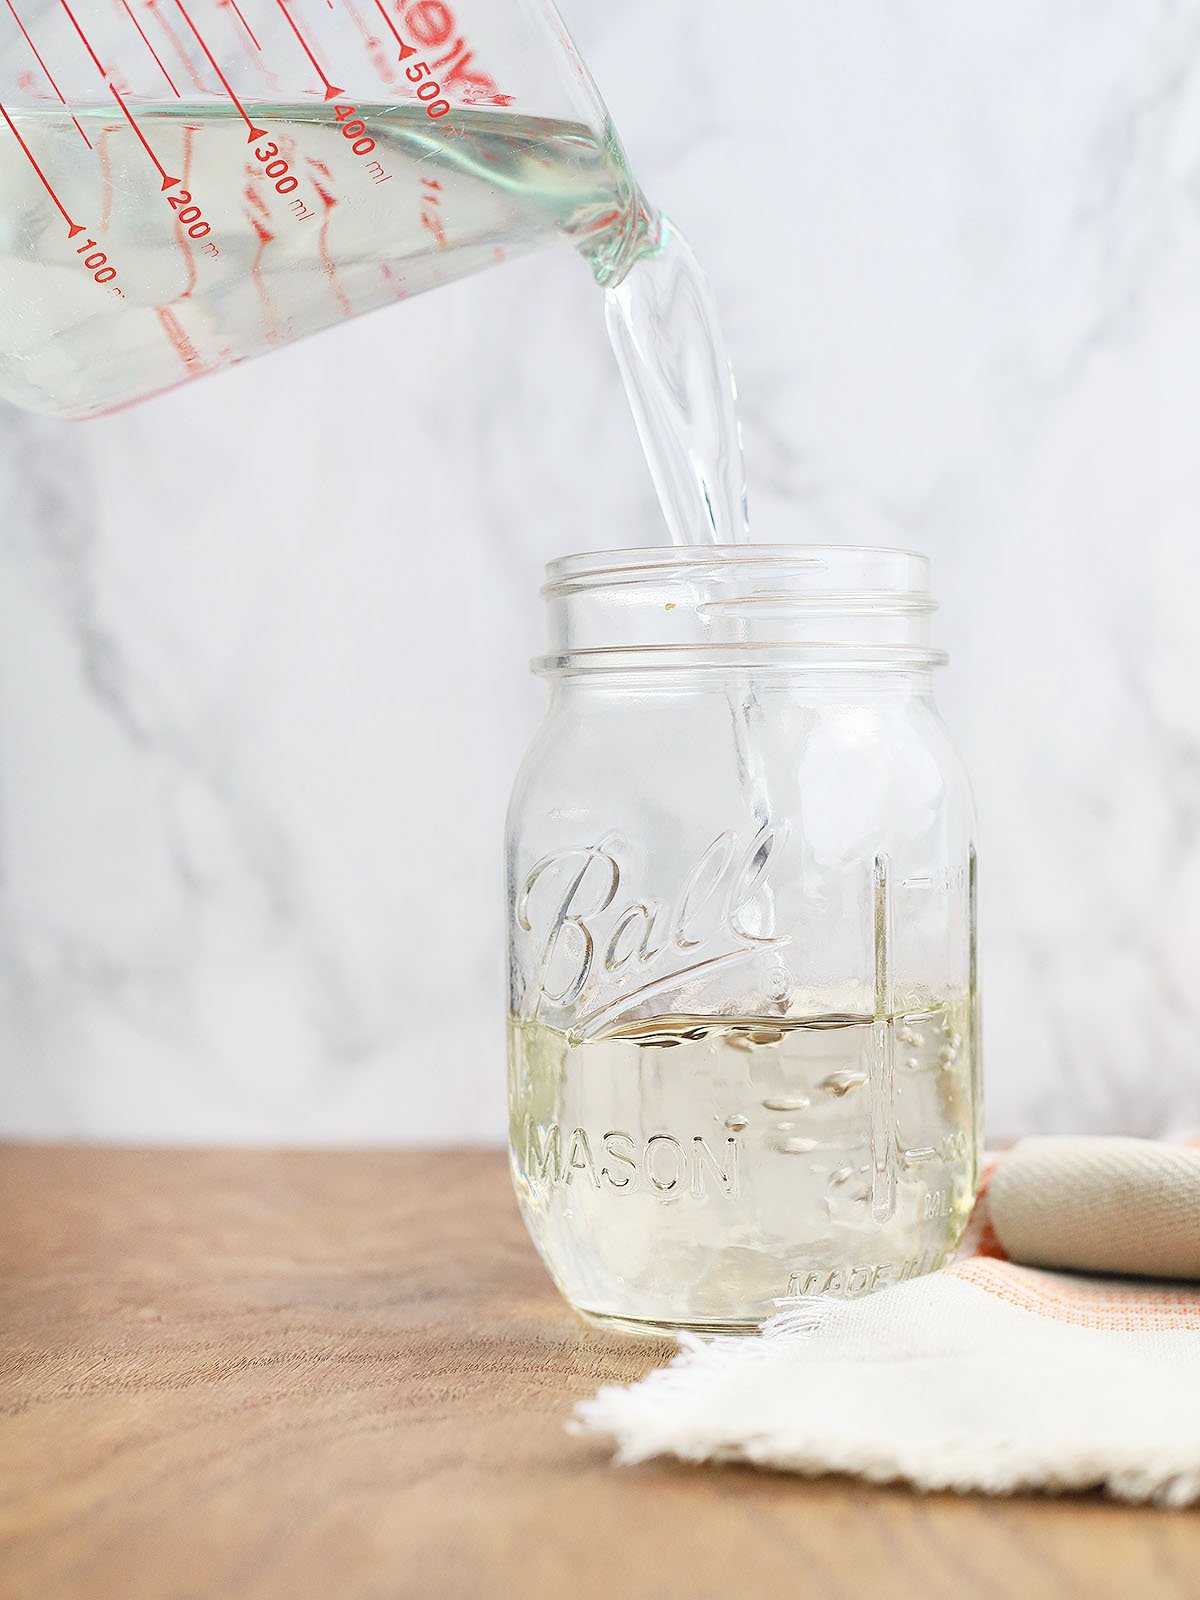 pouring cooled simple syrup into a Mason jar